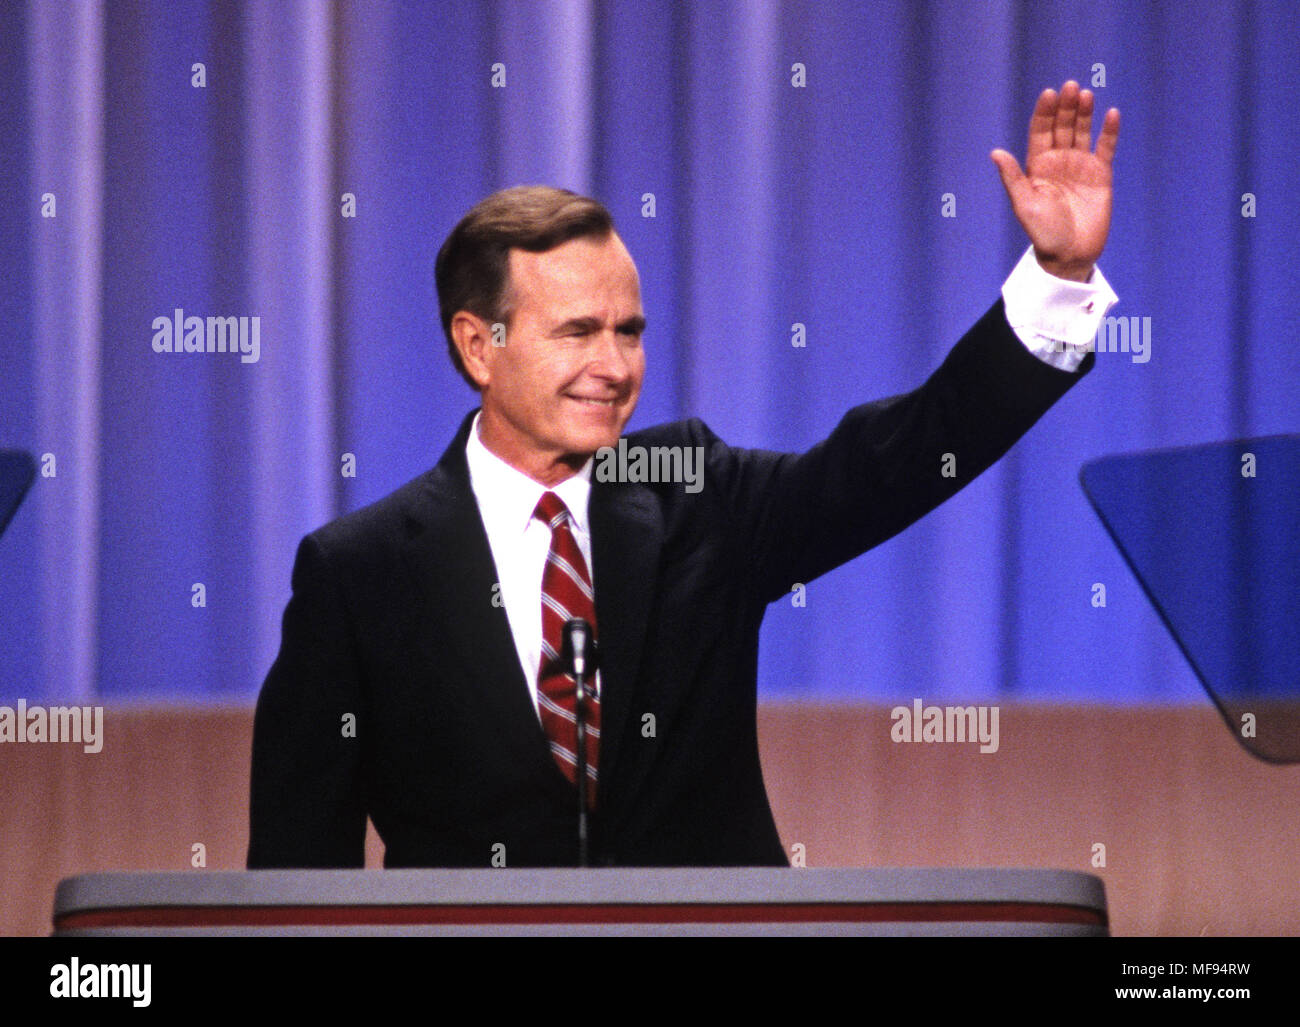 New Orleans, Louisiana, USA. 18th Aug, 1988. United States Vice President GEORGE H.W. BUSH waves to the crowd from the podium as he delivers his speech accepting his party's nomination for President of the United States at the 1988 Republican Convention at the Super Dome in New Orleans, Louisiana in 1988. Credit: Arnie Sachs/CNP/ZUMAPRESS.com/Alamy Live News Stock Photo